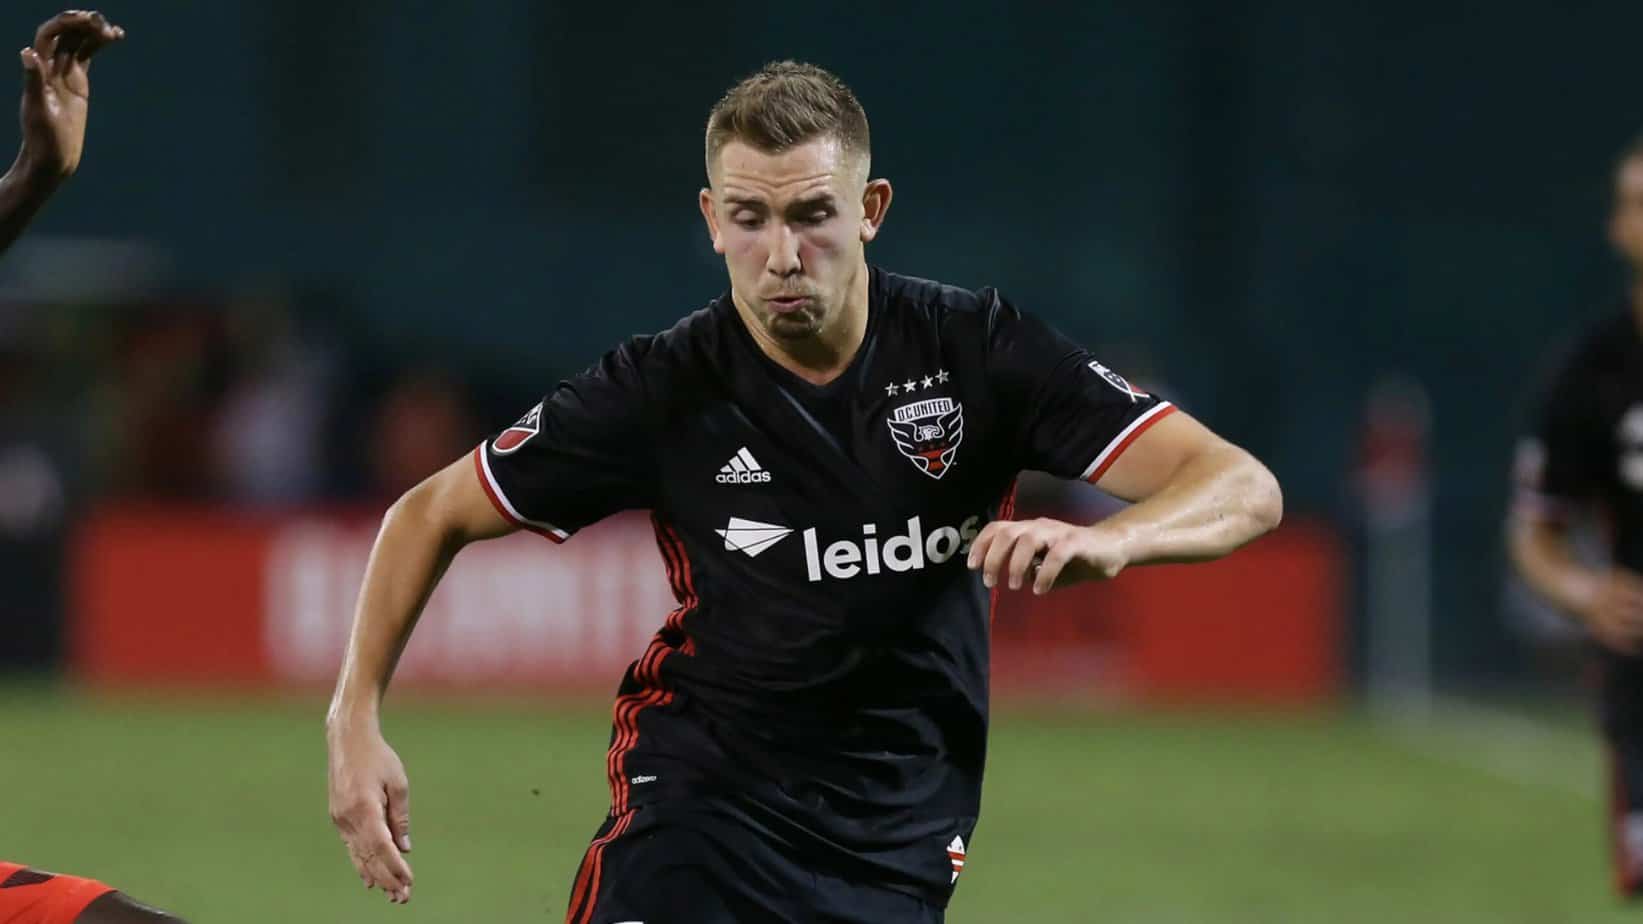 FC Dallas vs. DC United Preview and Betting Odds